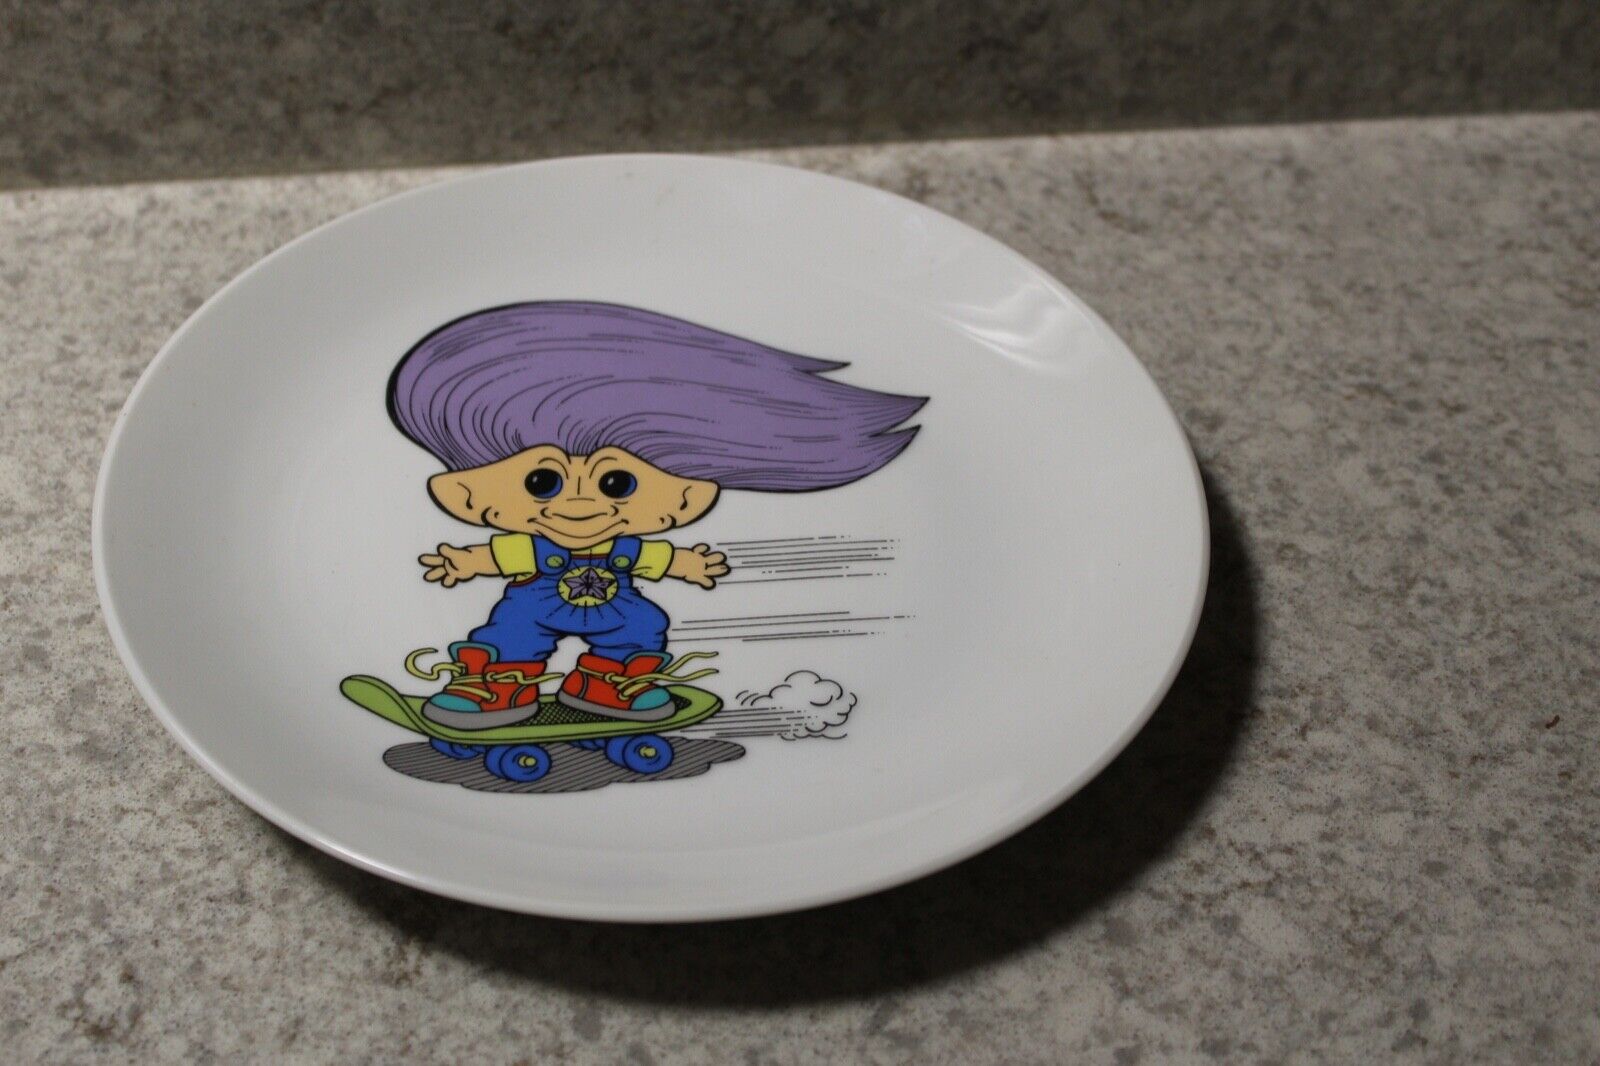 Troll Doll Collector Plate 1992 Ace Novelty